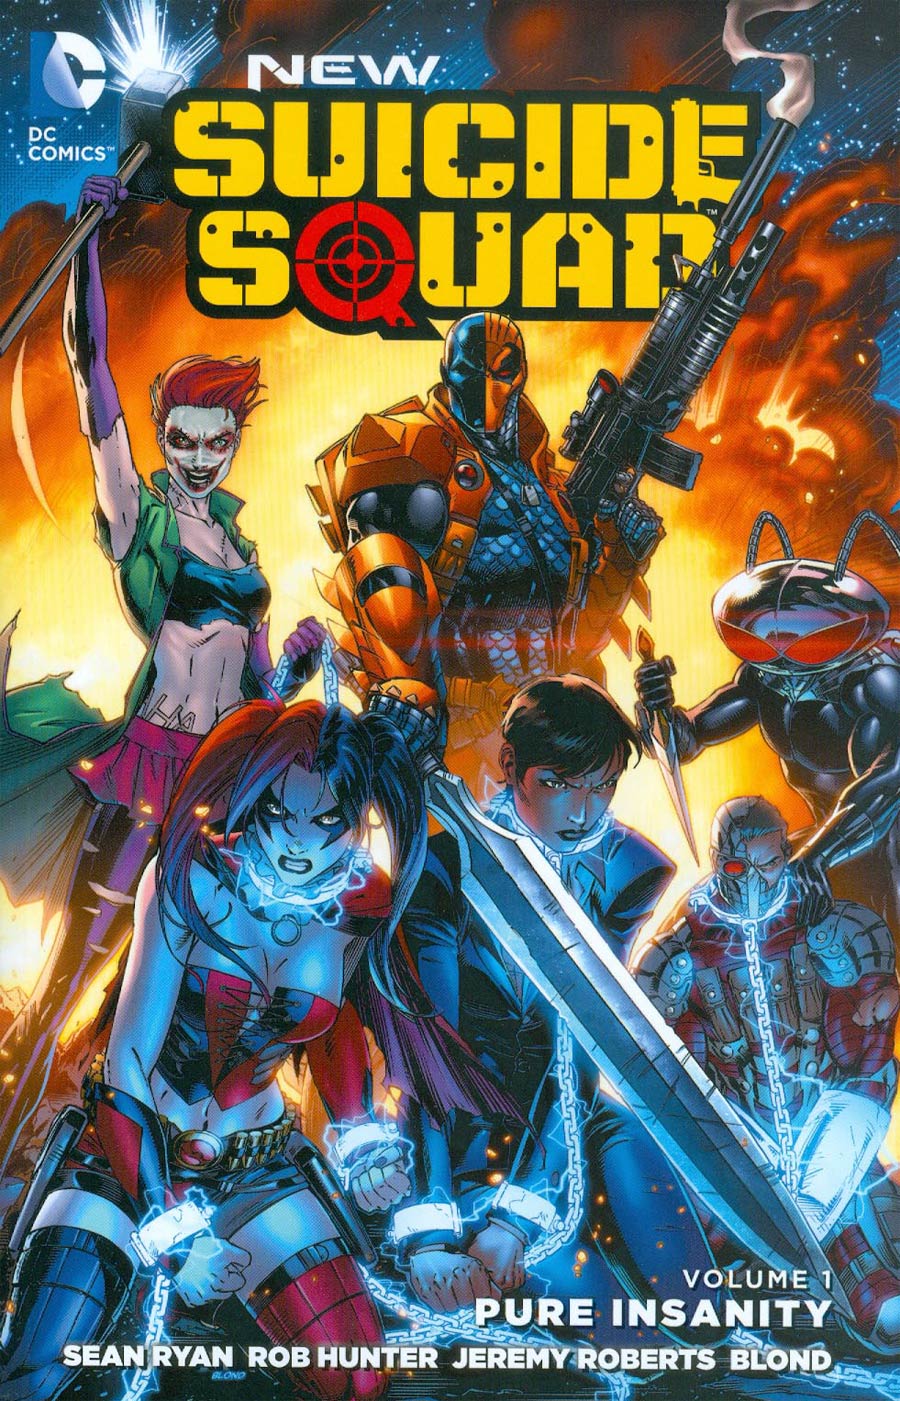 New Suicide Squad (New 52) Vol 1 Pure Insanity TP